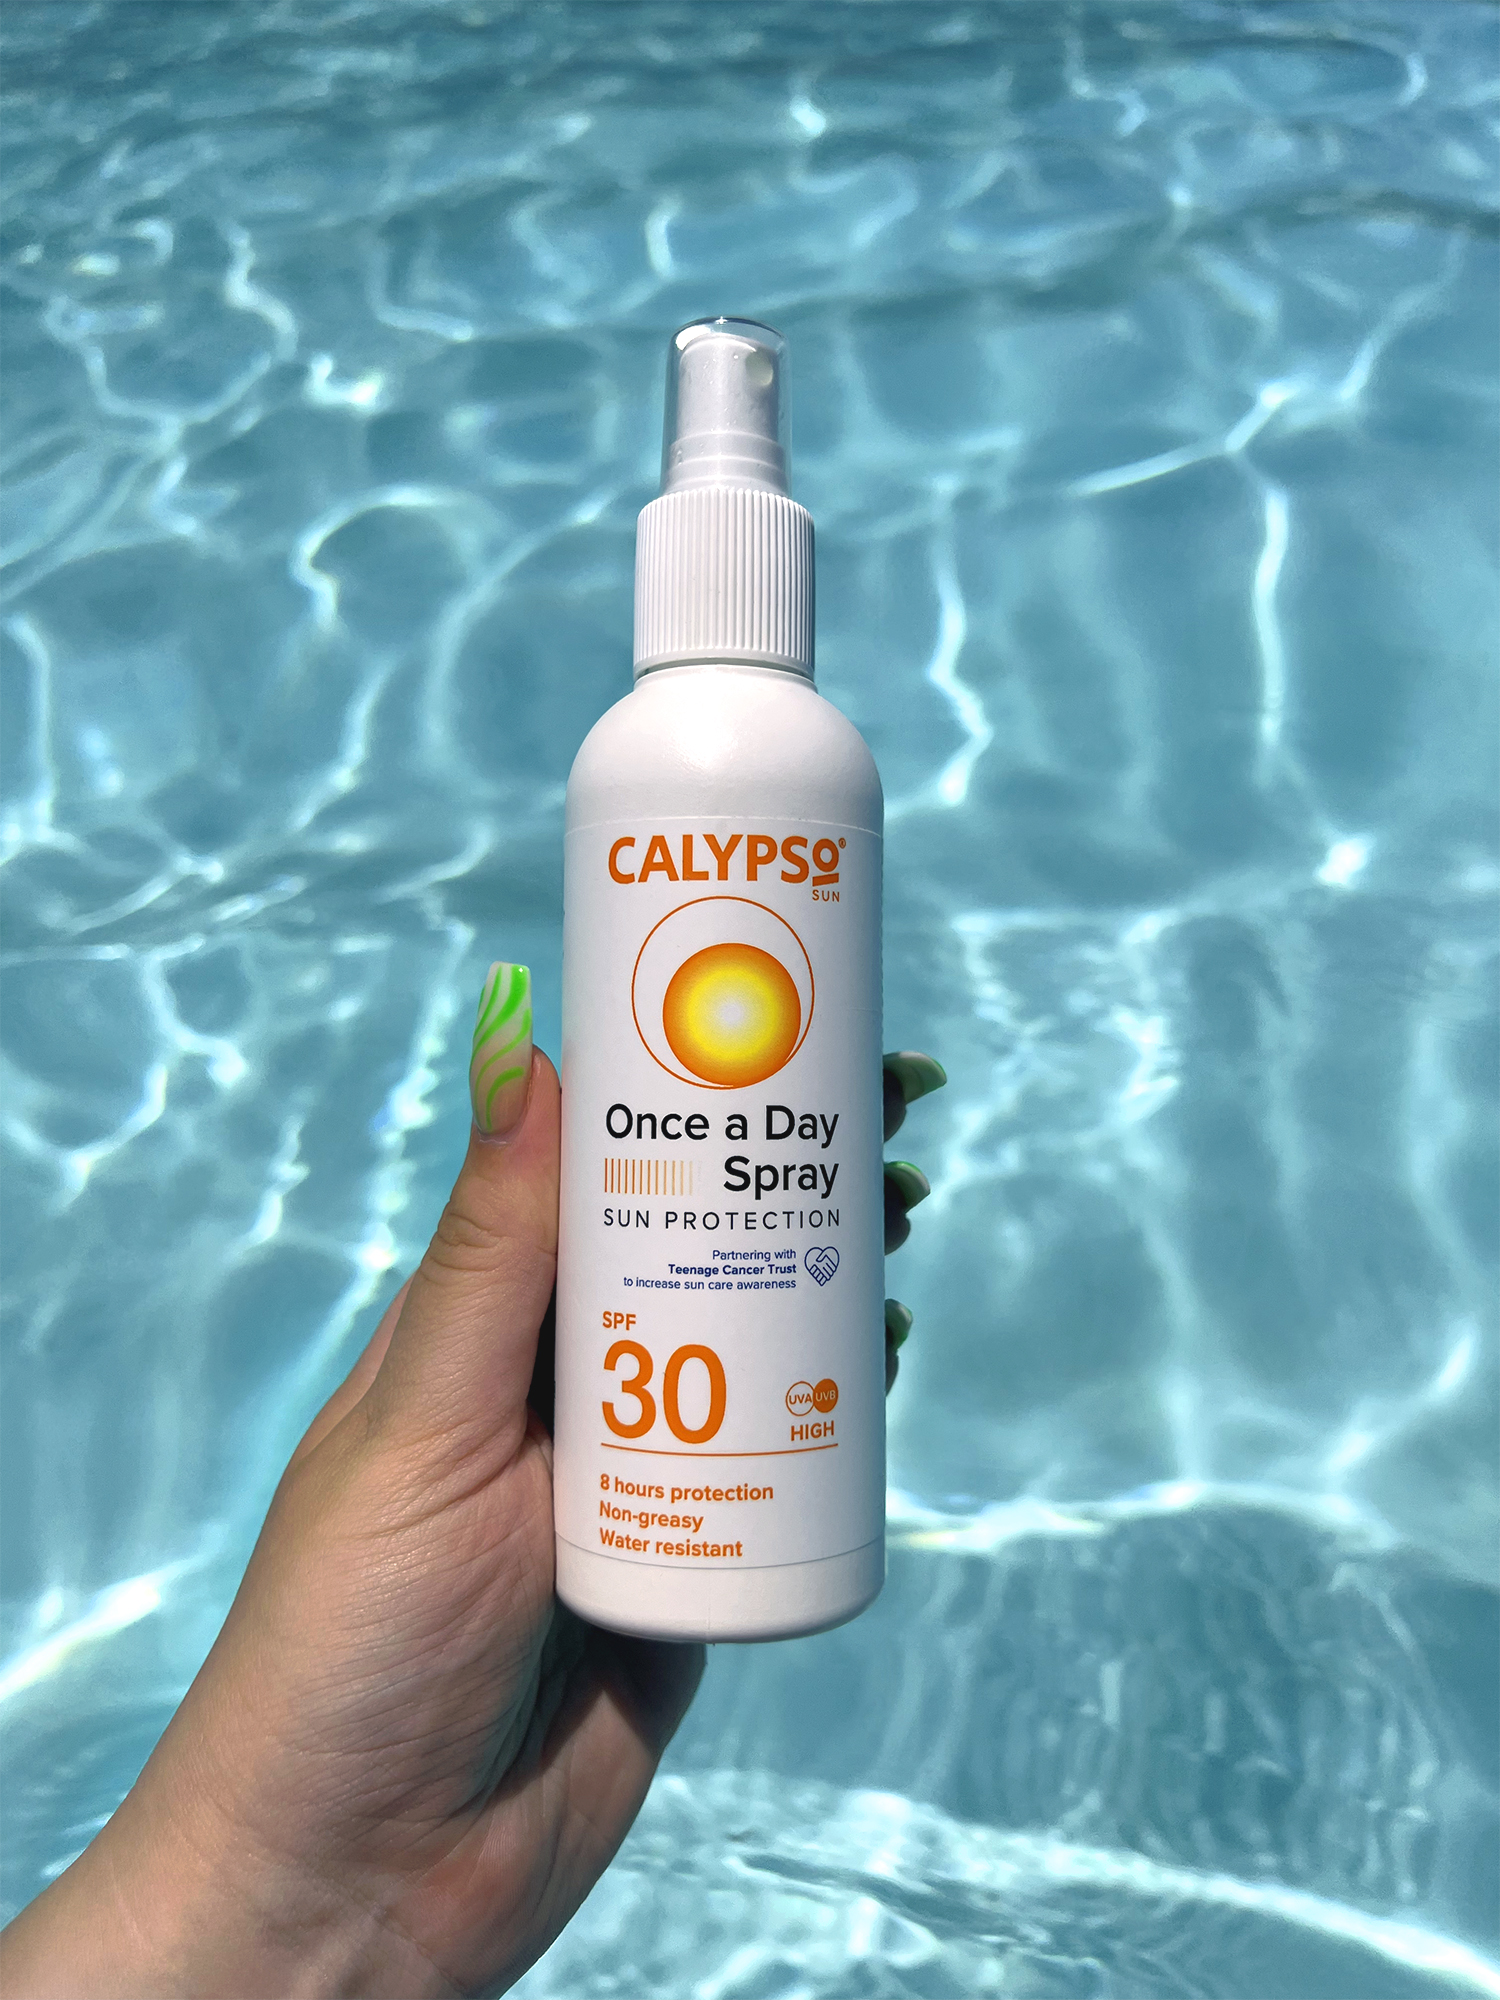 Calypso Once a Day Pump Spray swimming pool